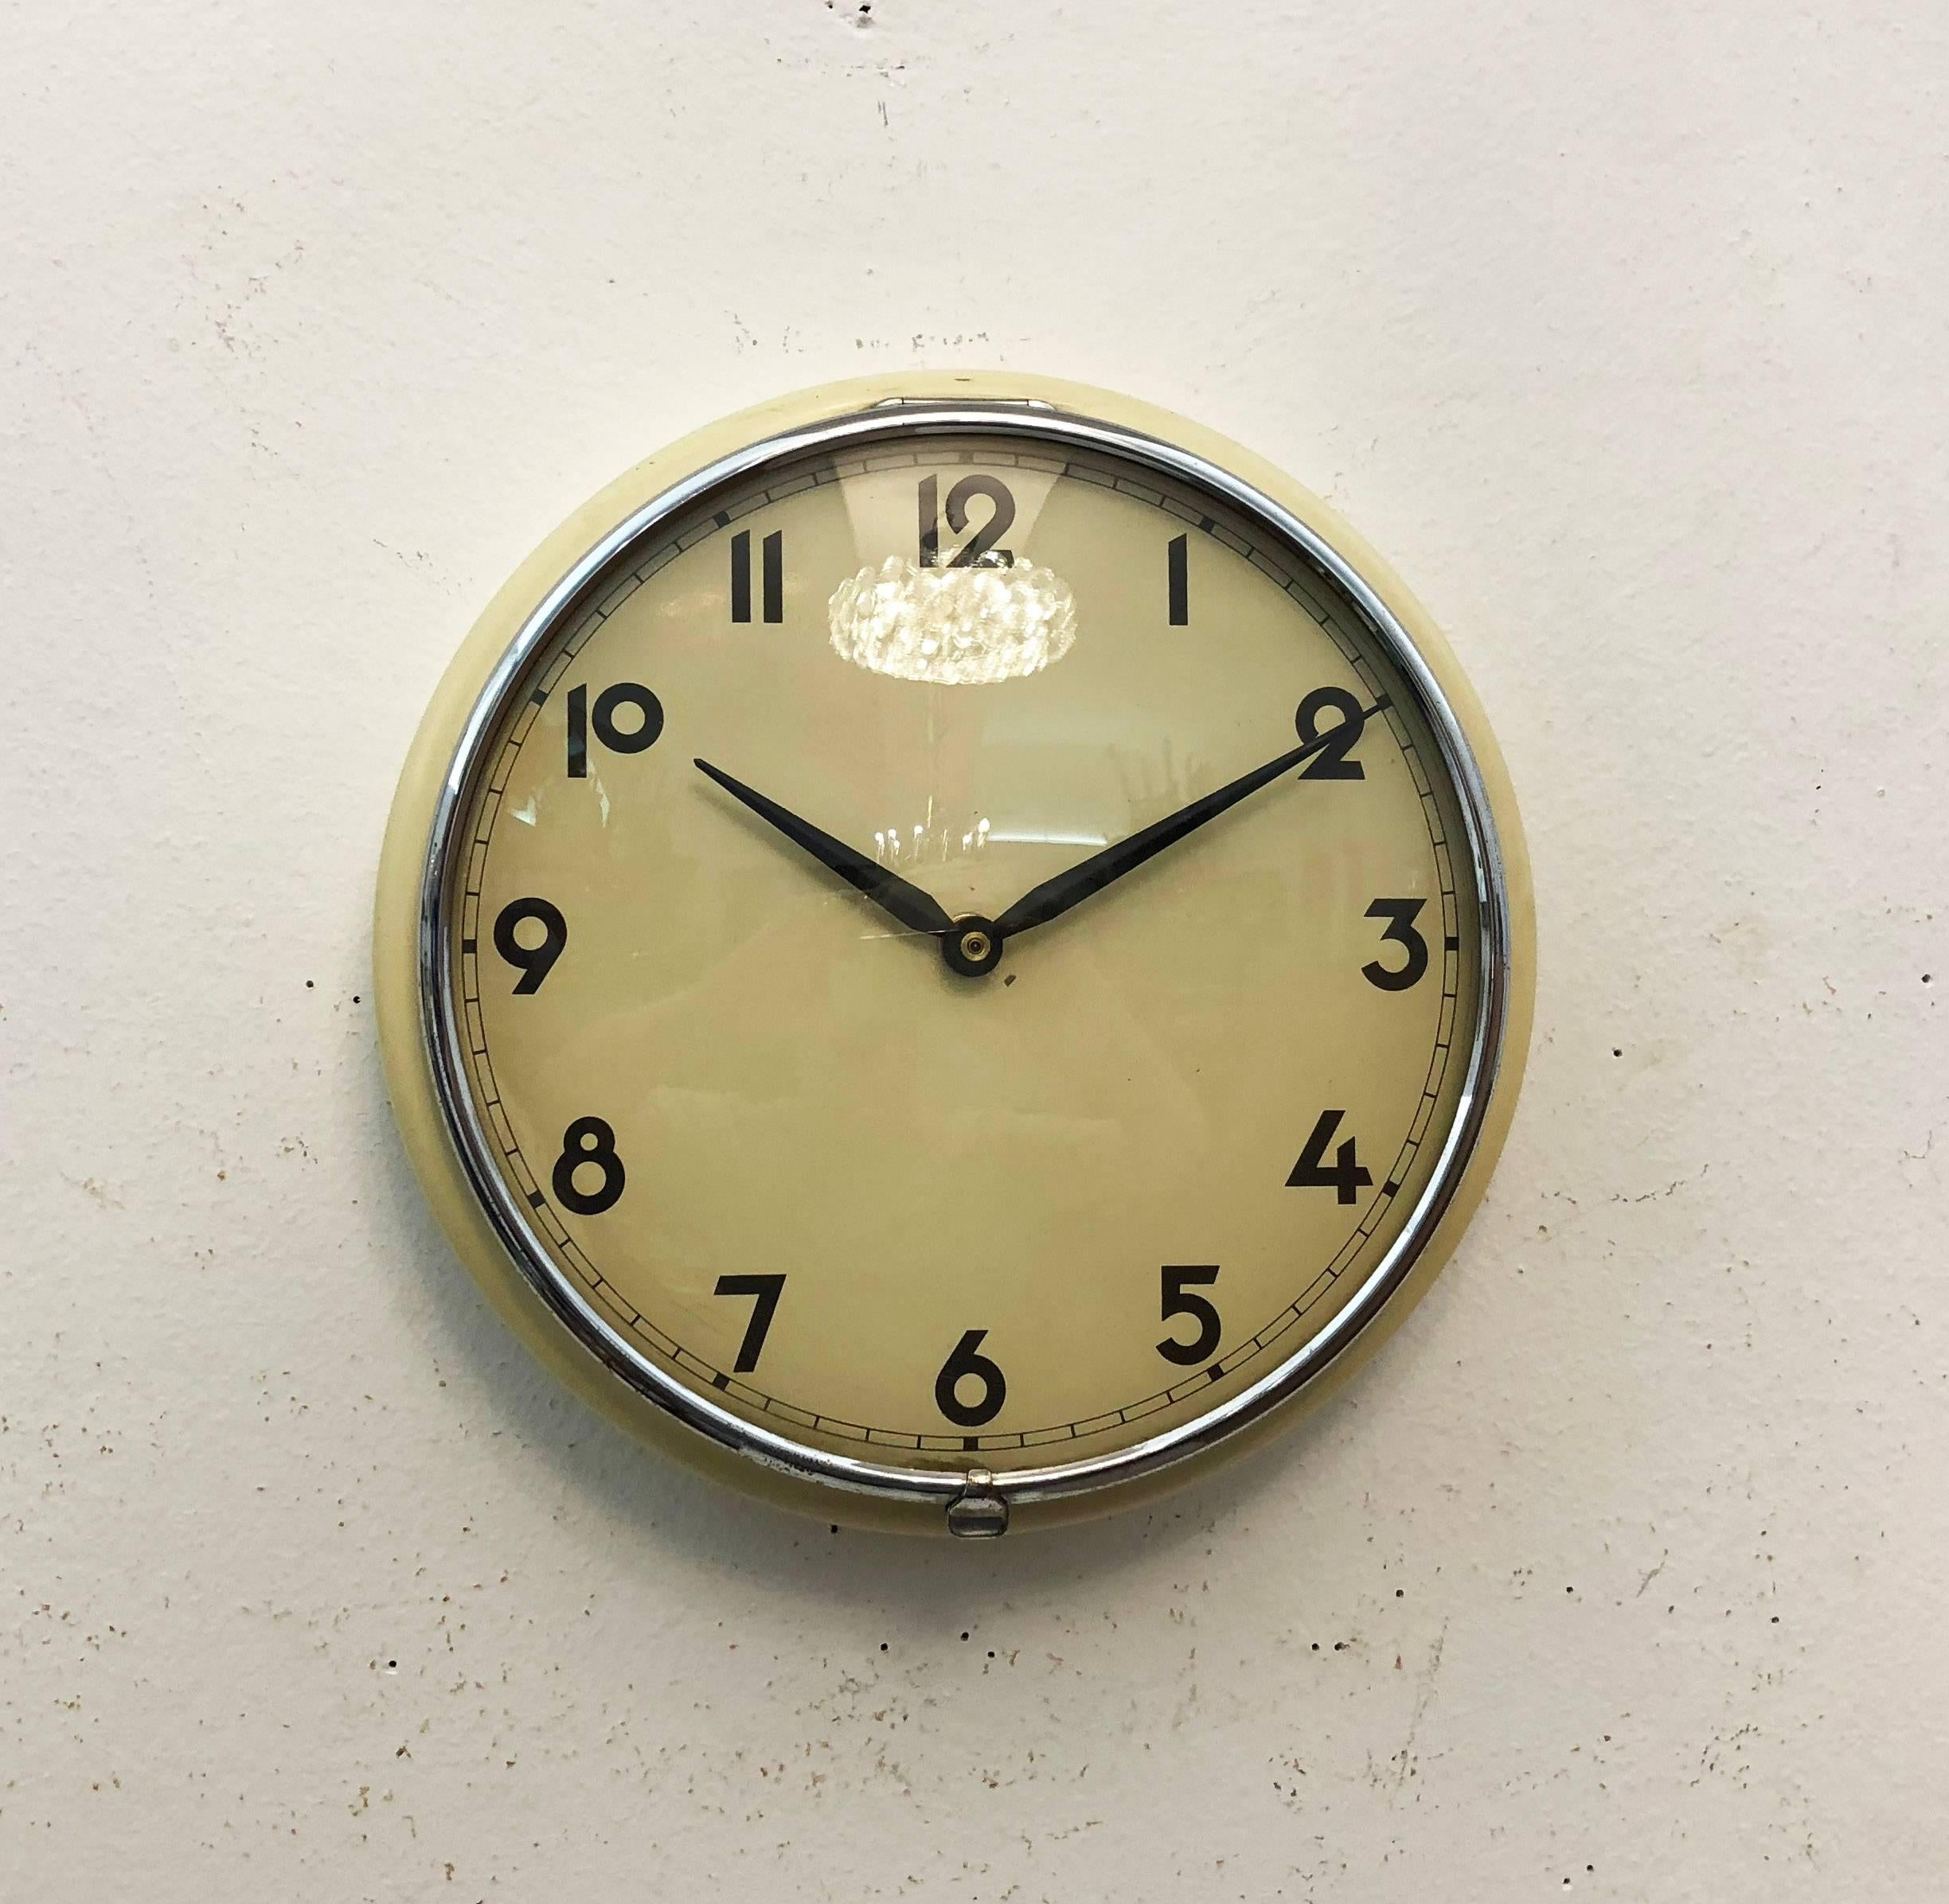 Steel frame painted, clock face with Arabic digits and glass cover, fitted with a battery movement.
Made in Austria in the late 1950s.